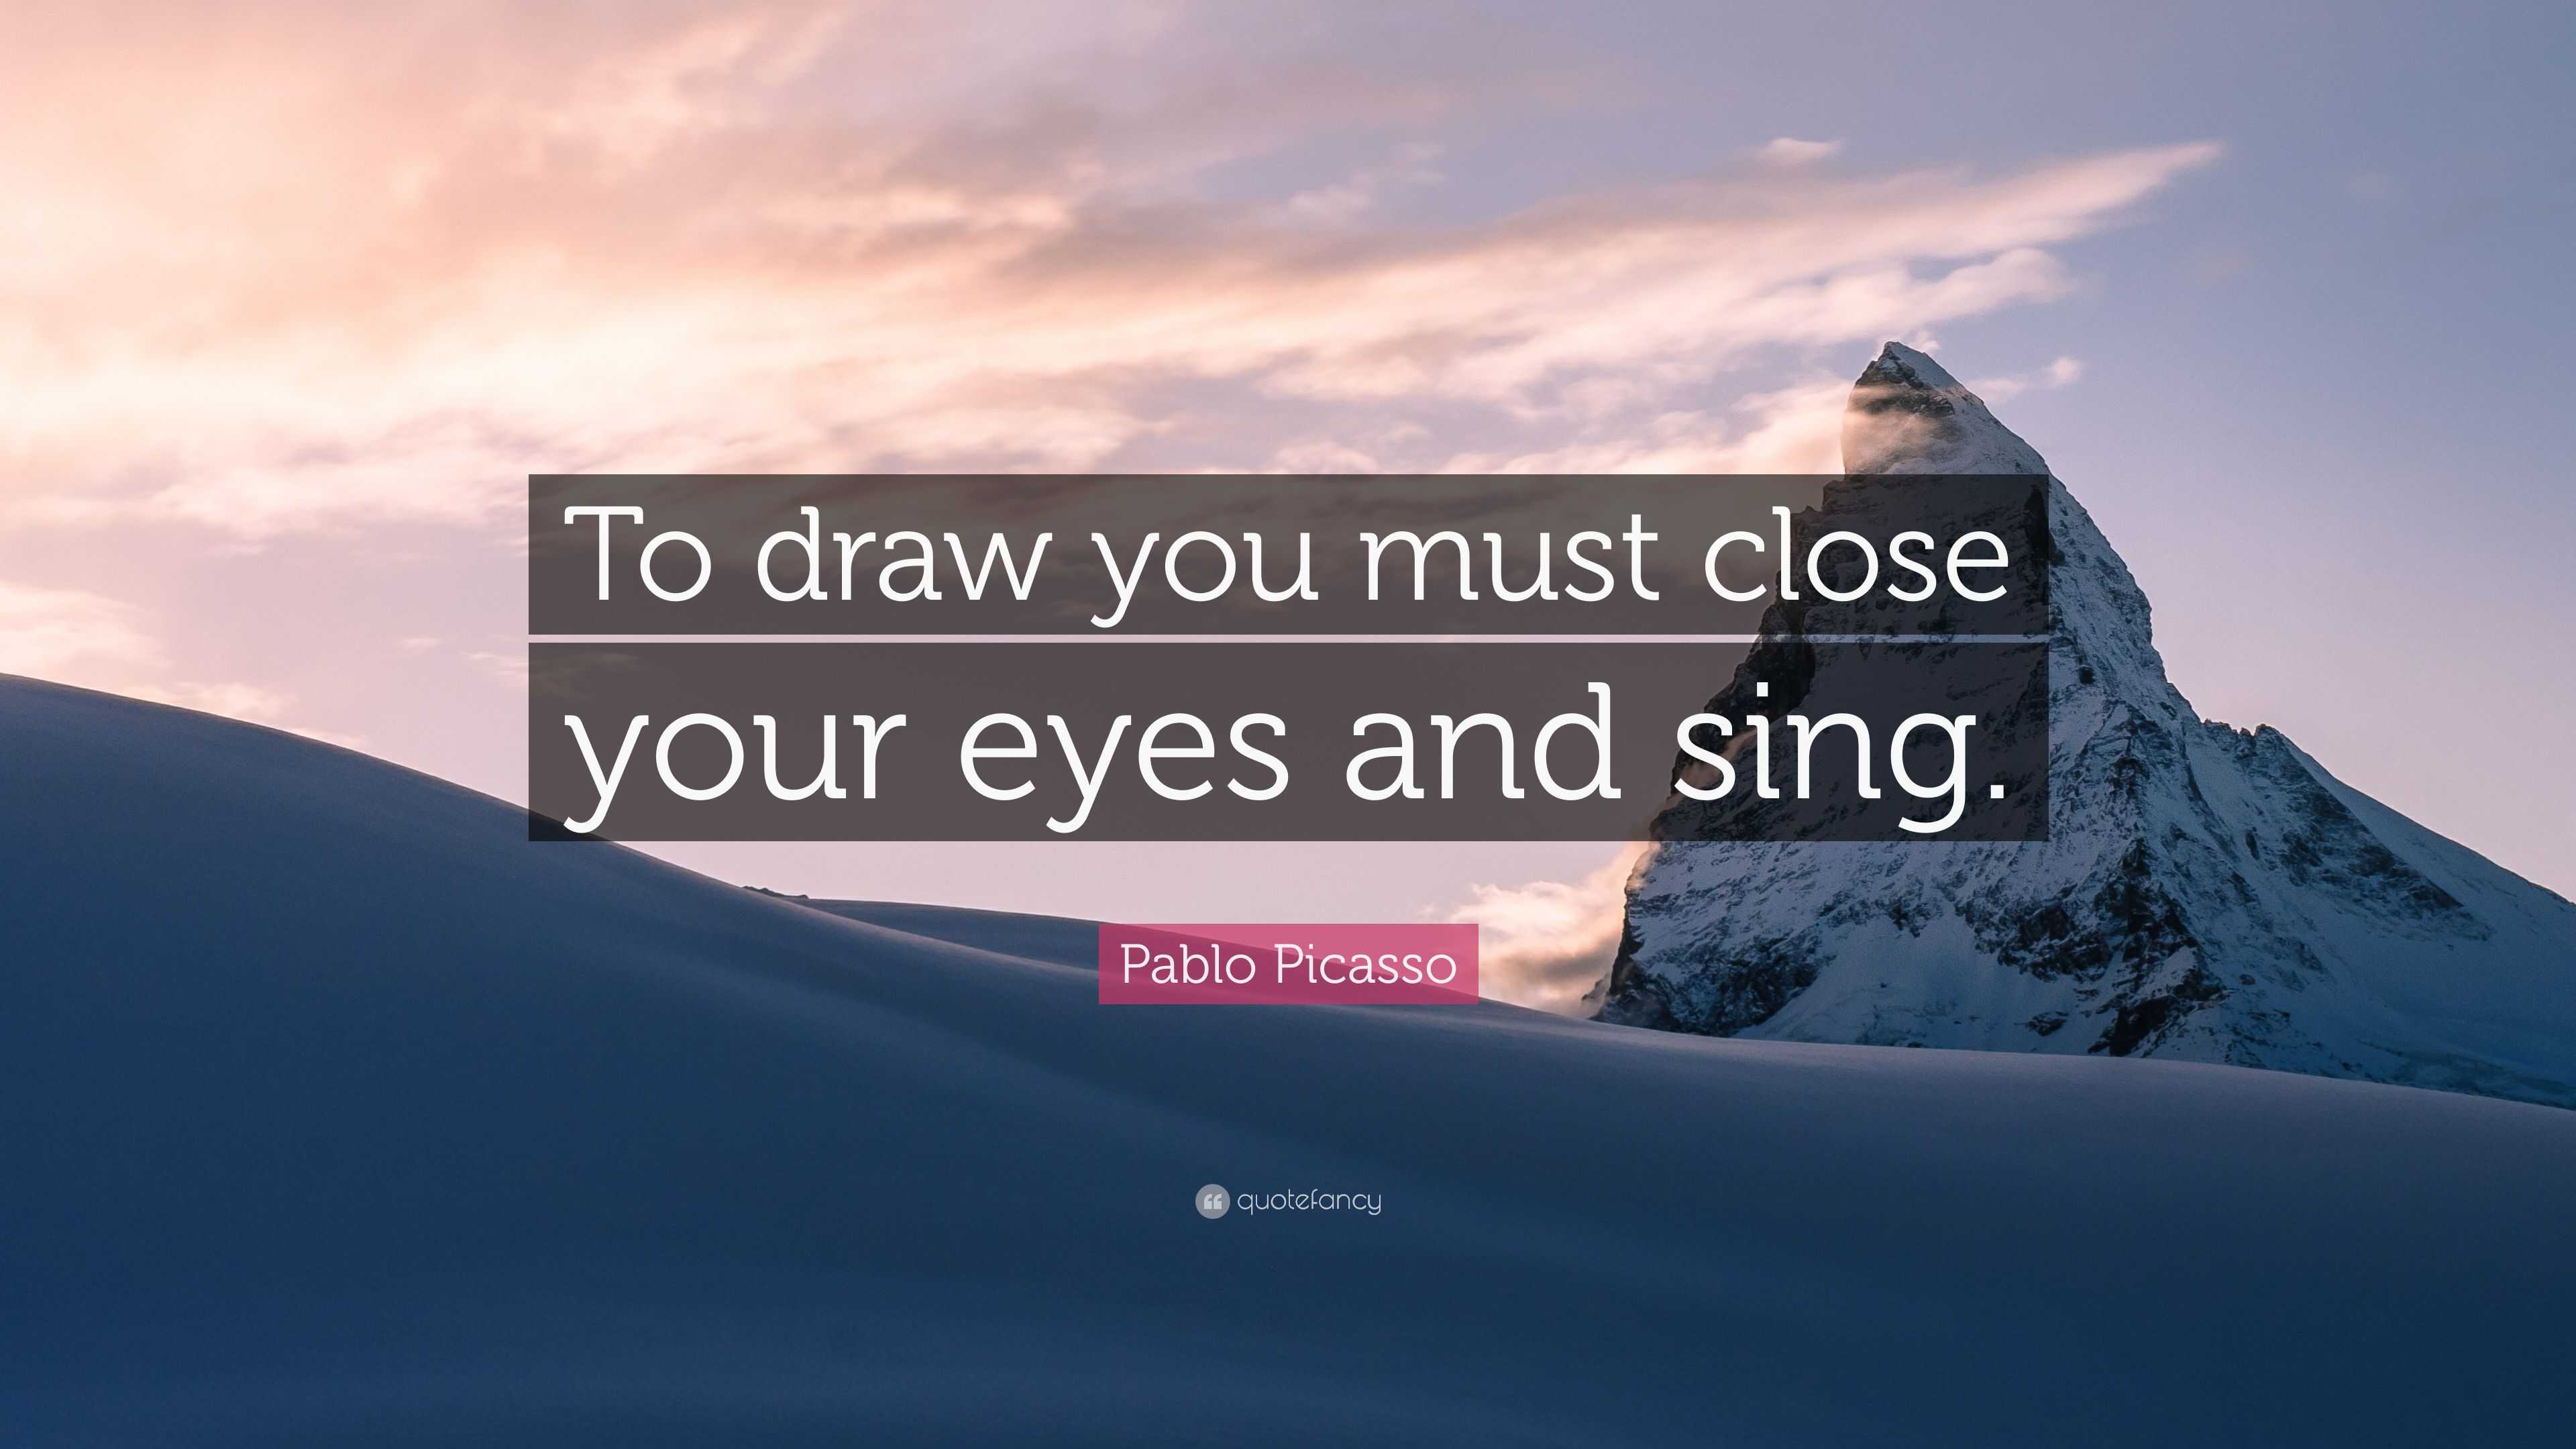 To draw you must close your eyes and sing! #pablopicasso #arts #painting  #blackmagic #enjoylife